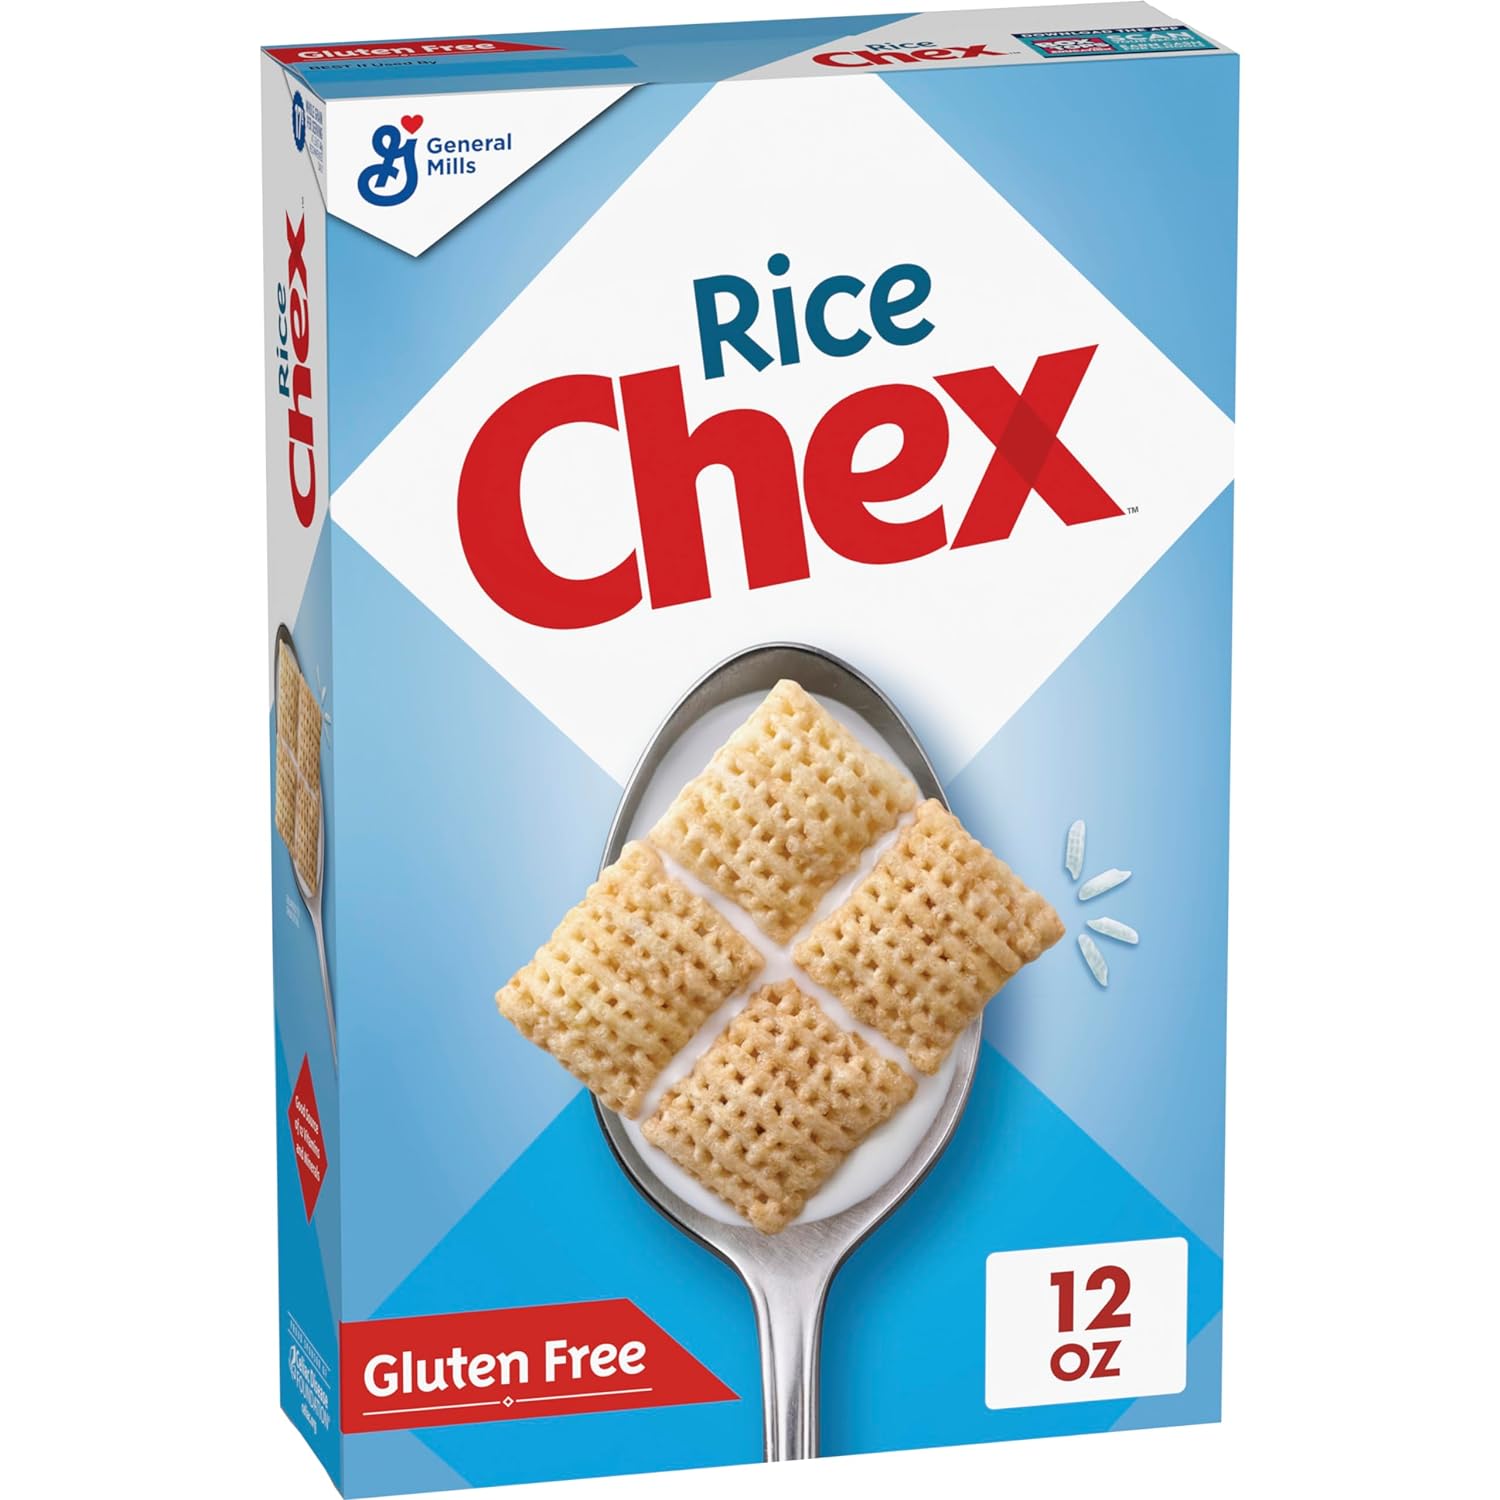 Rice Chex Gluten Free Breakfast Cereal, Made with Whole Grain, 12 oz